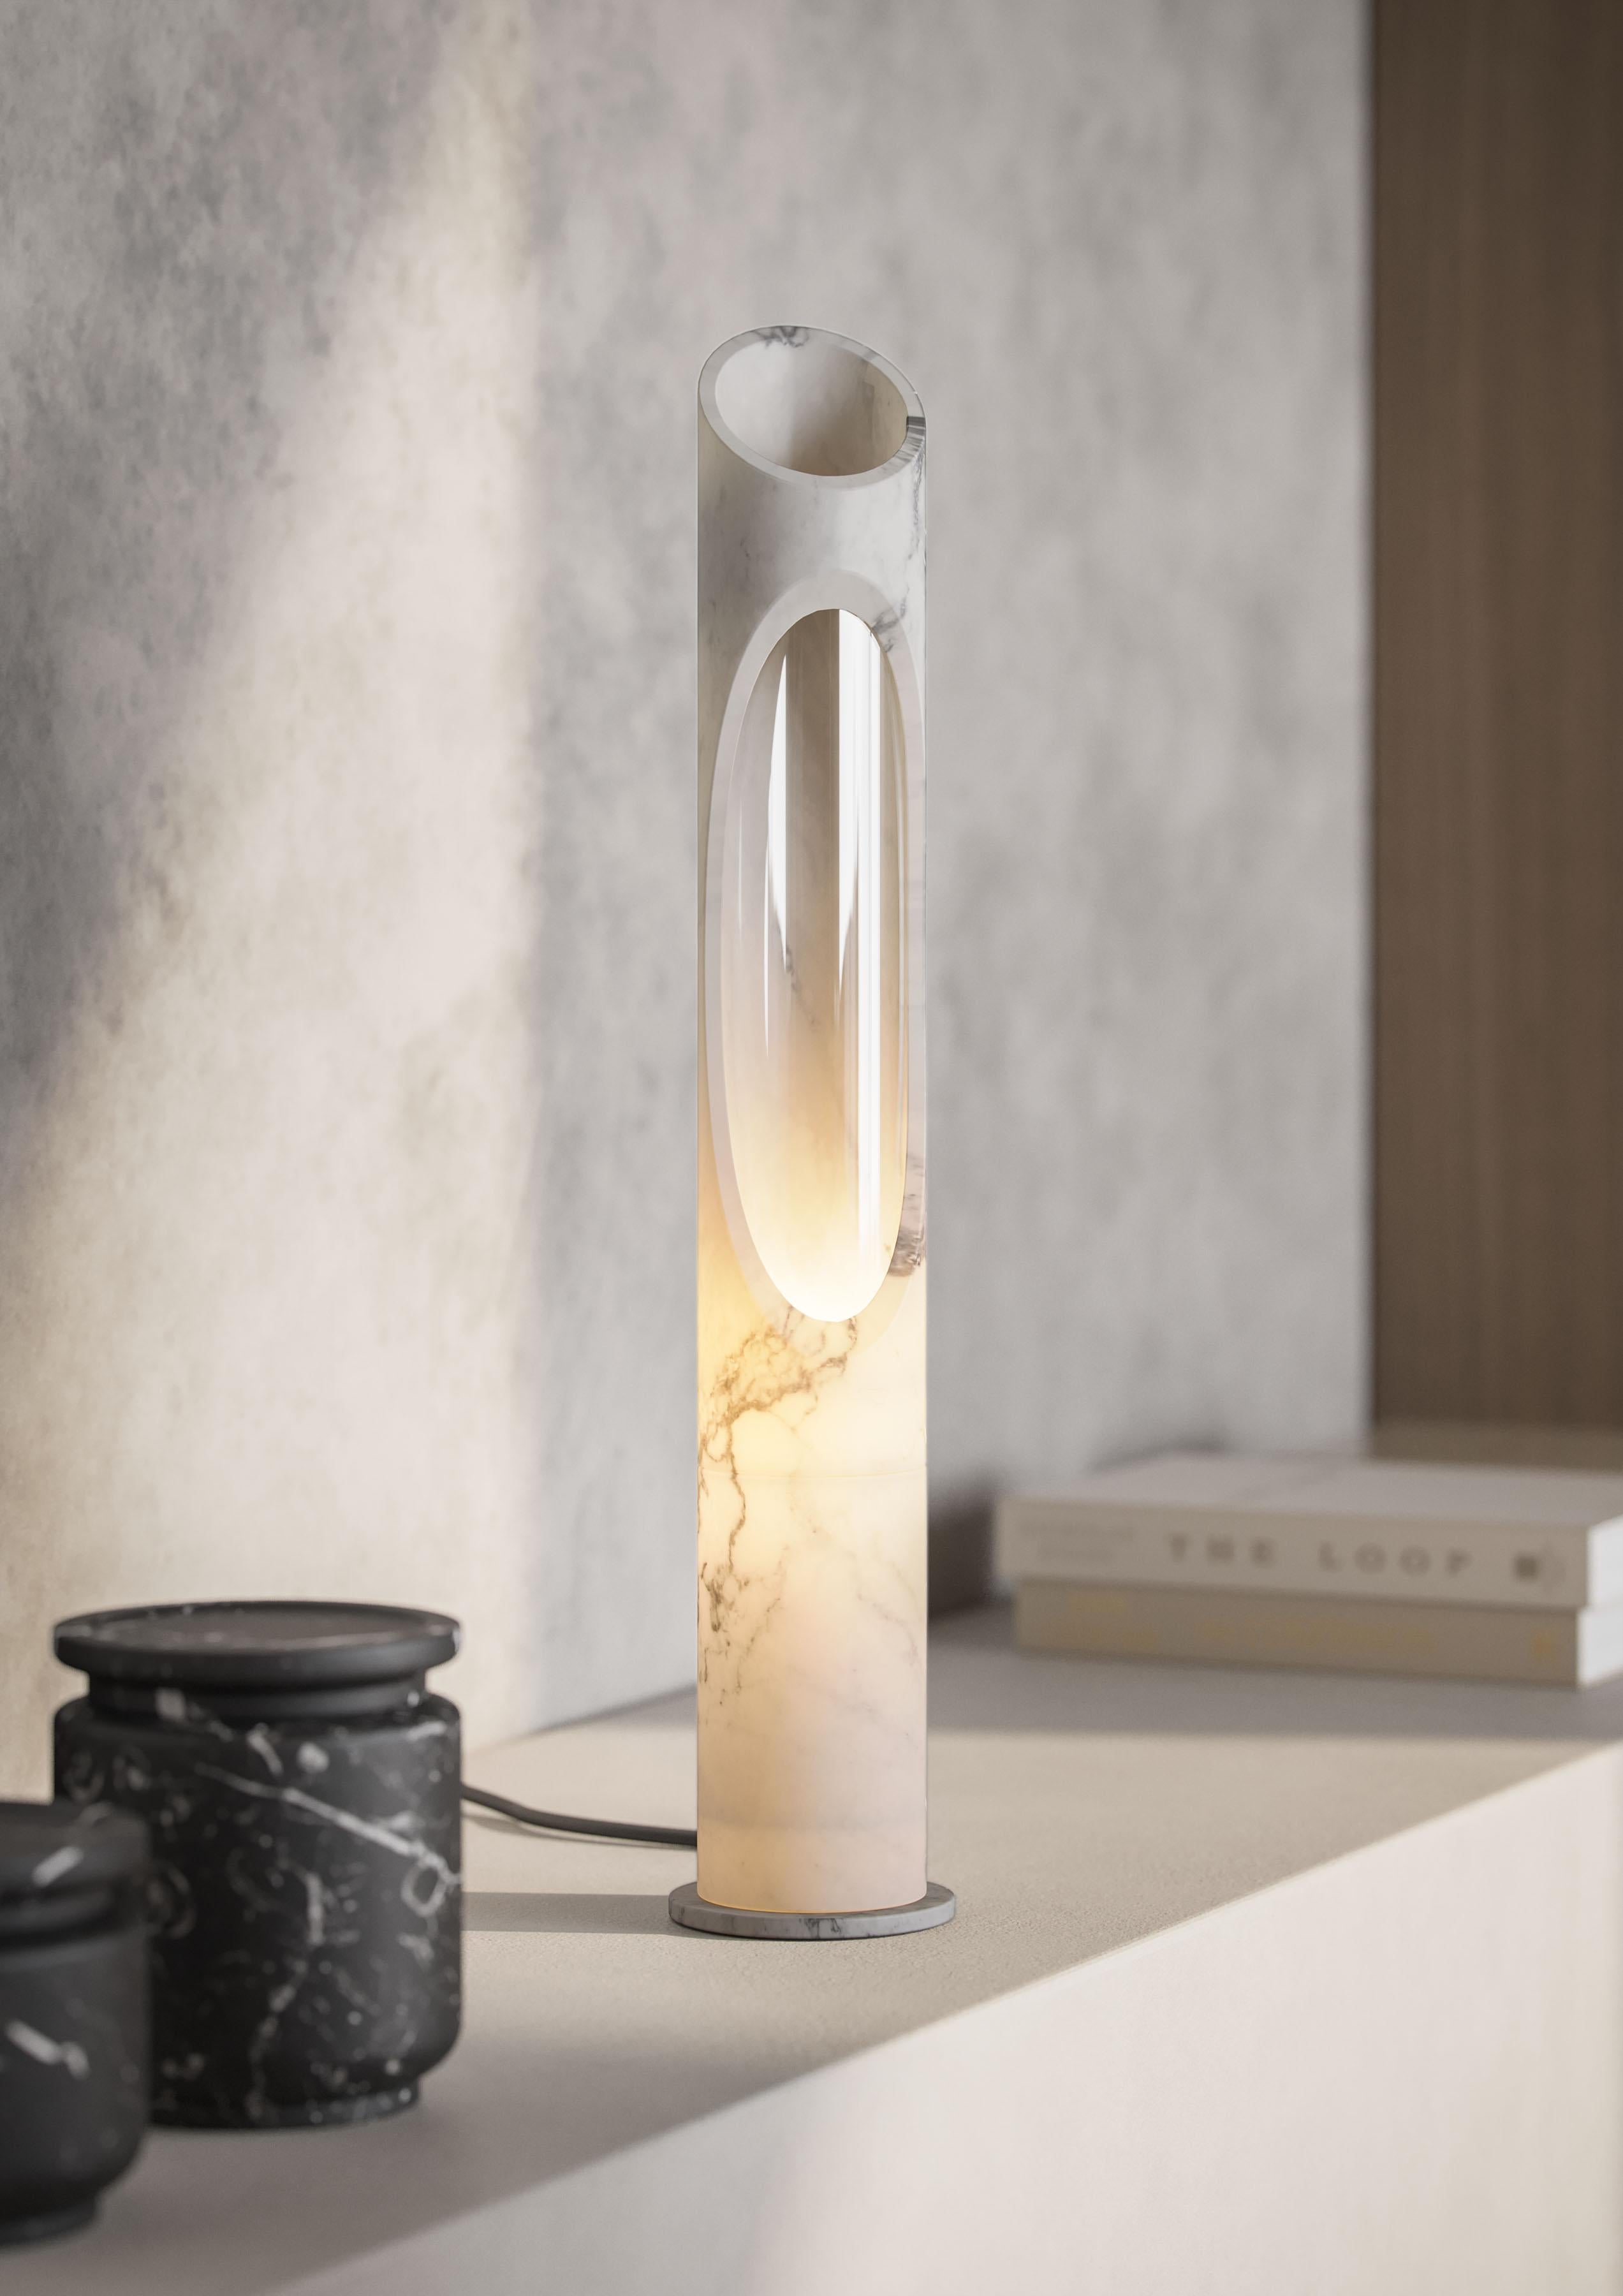 Lamp S in White Arabescato marble, designed by Jacopo Simonetti.
Available also in Pink Egeo, White Onyx, Black Marquinia marble and in the L version. 

Armonia Collection: Inspired by the captivating image that two contrasting elements can